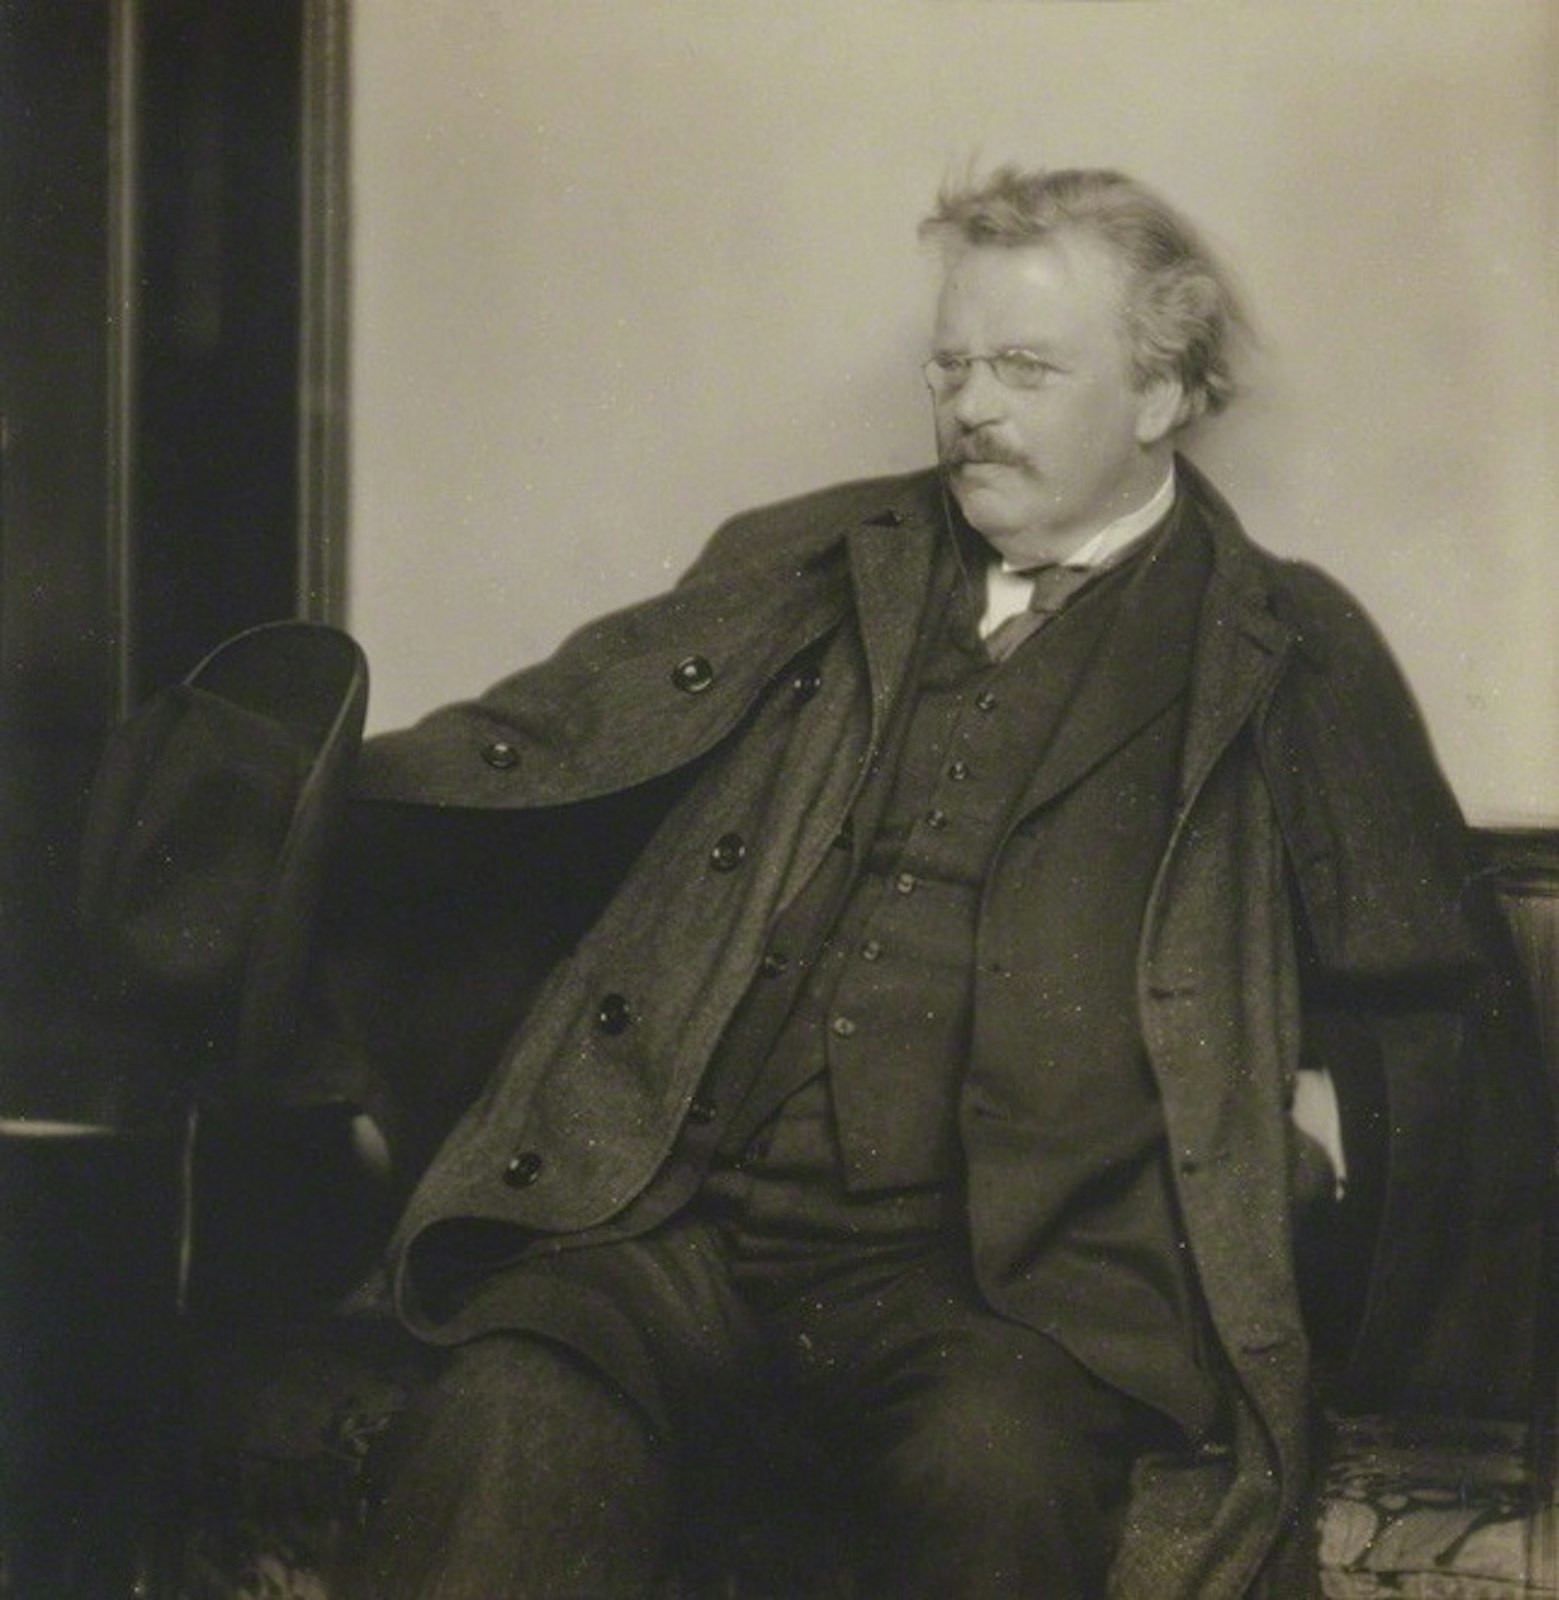 Chesterton enjoyed debating various topics with friends and colleagues at the pub. He was a particular collector of friends of various different backgrounds and perspectives, something the Southeast Michigan Chesterton Society strives to do in its monthly meetings. (Herbert Lambert, Public domain, via Wikimedia Commons)